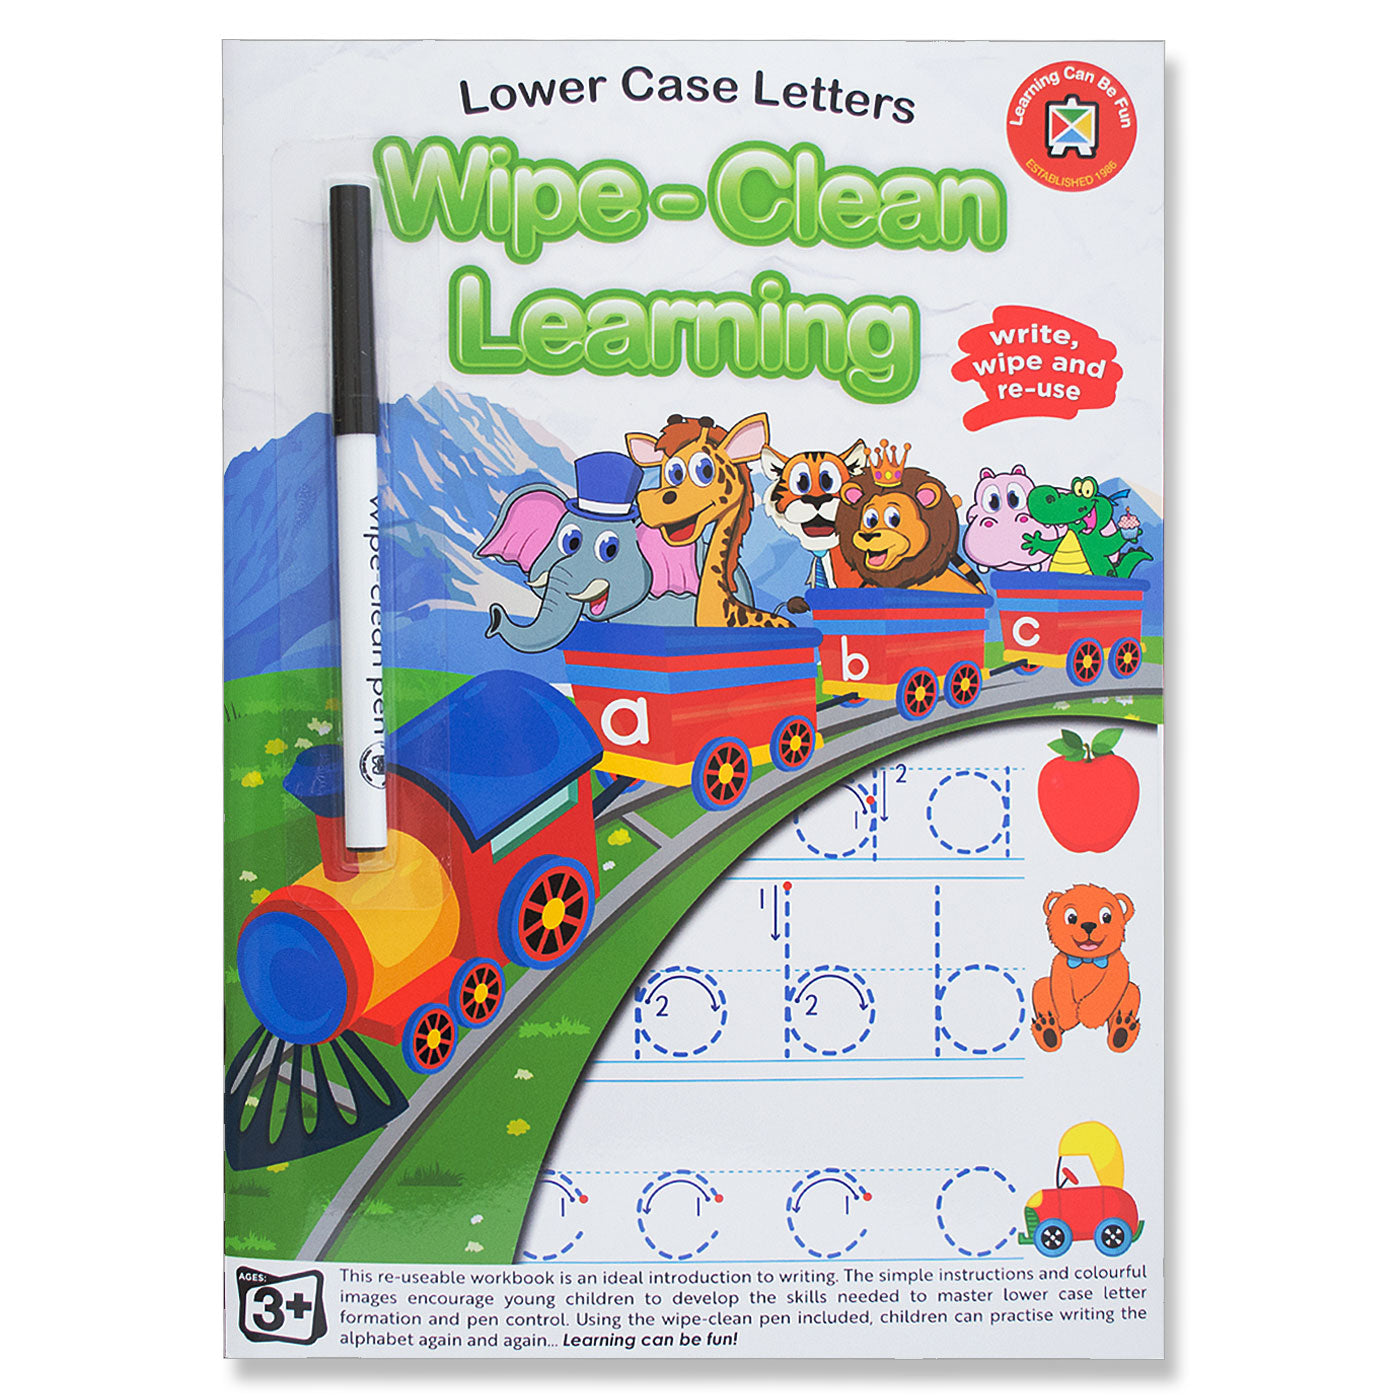 LCBF Wipe Clean Learning Book Lower Case Letters with Marker